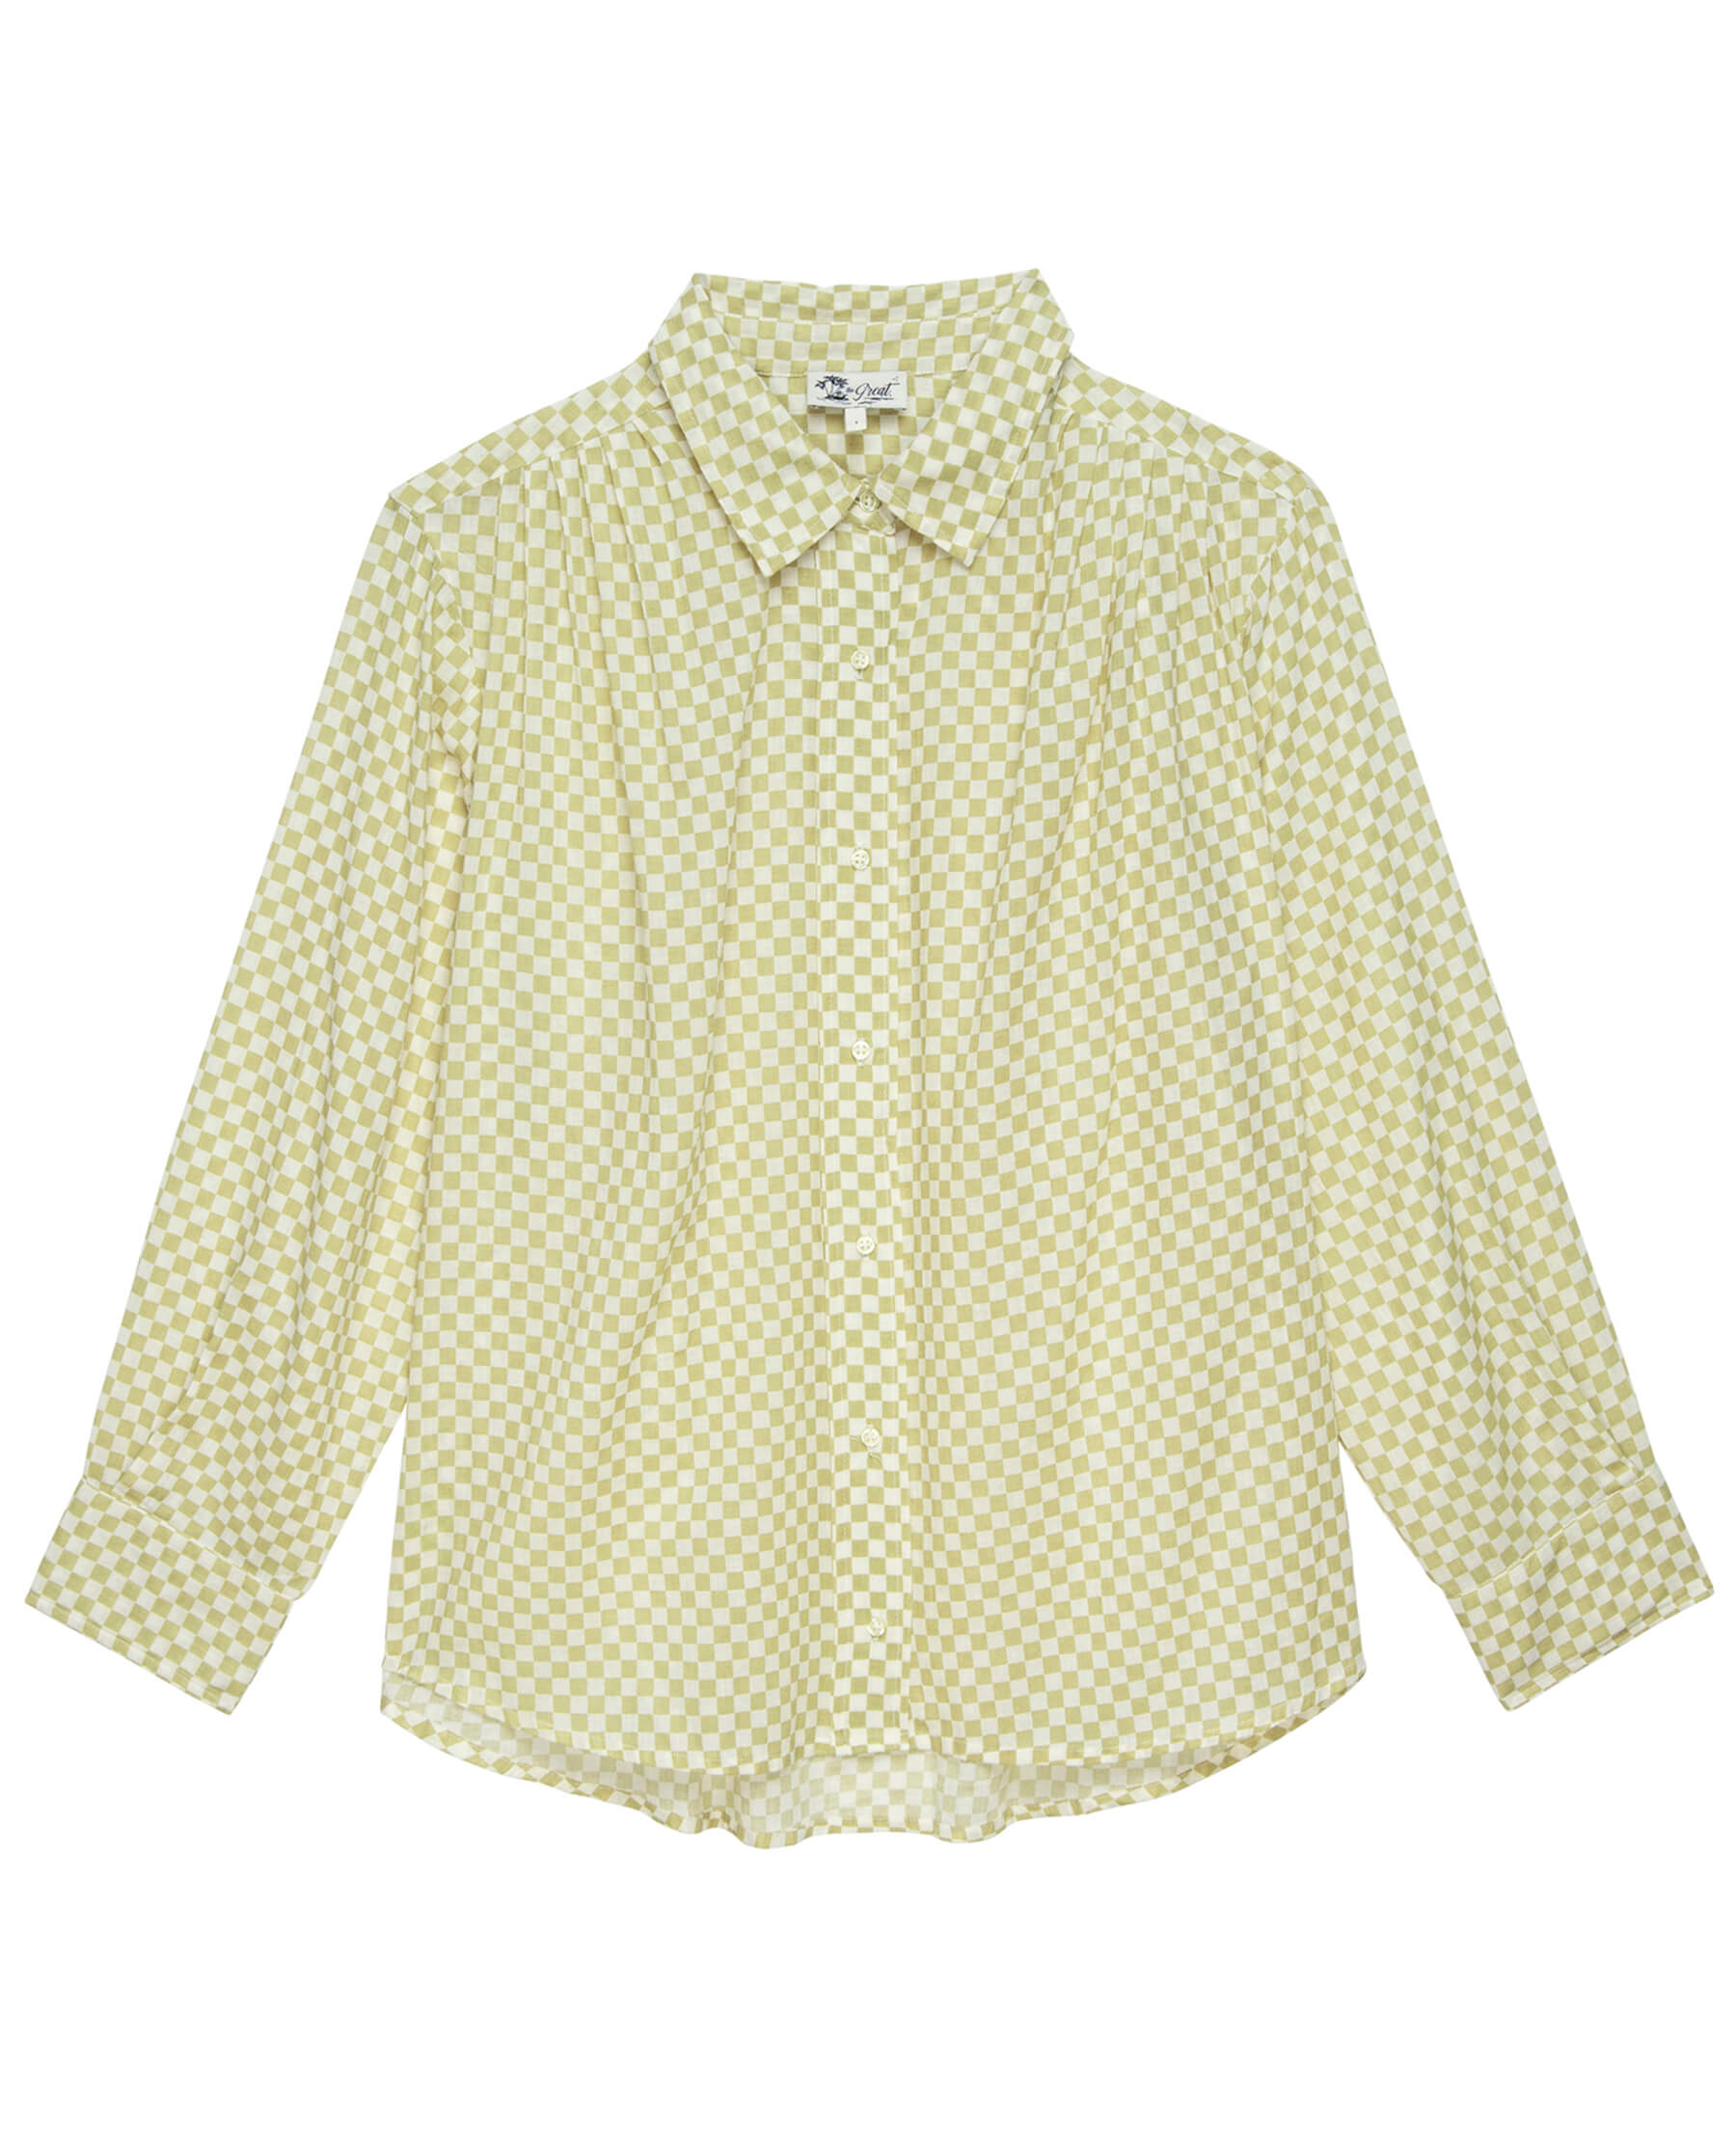 The Cove Shirt. -- Sand Check COVER-UP SHIRTS THE GREAT. SP24 SWIM